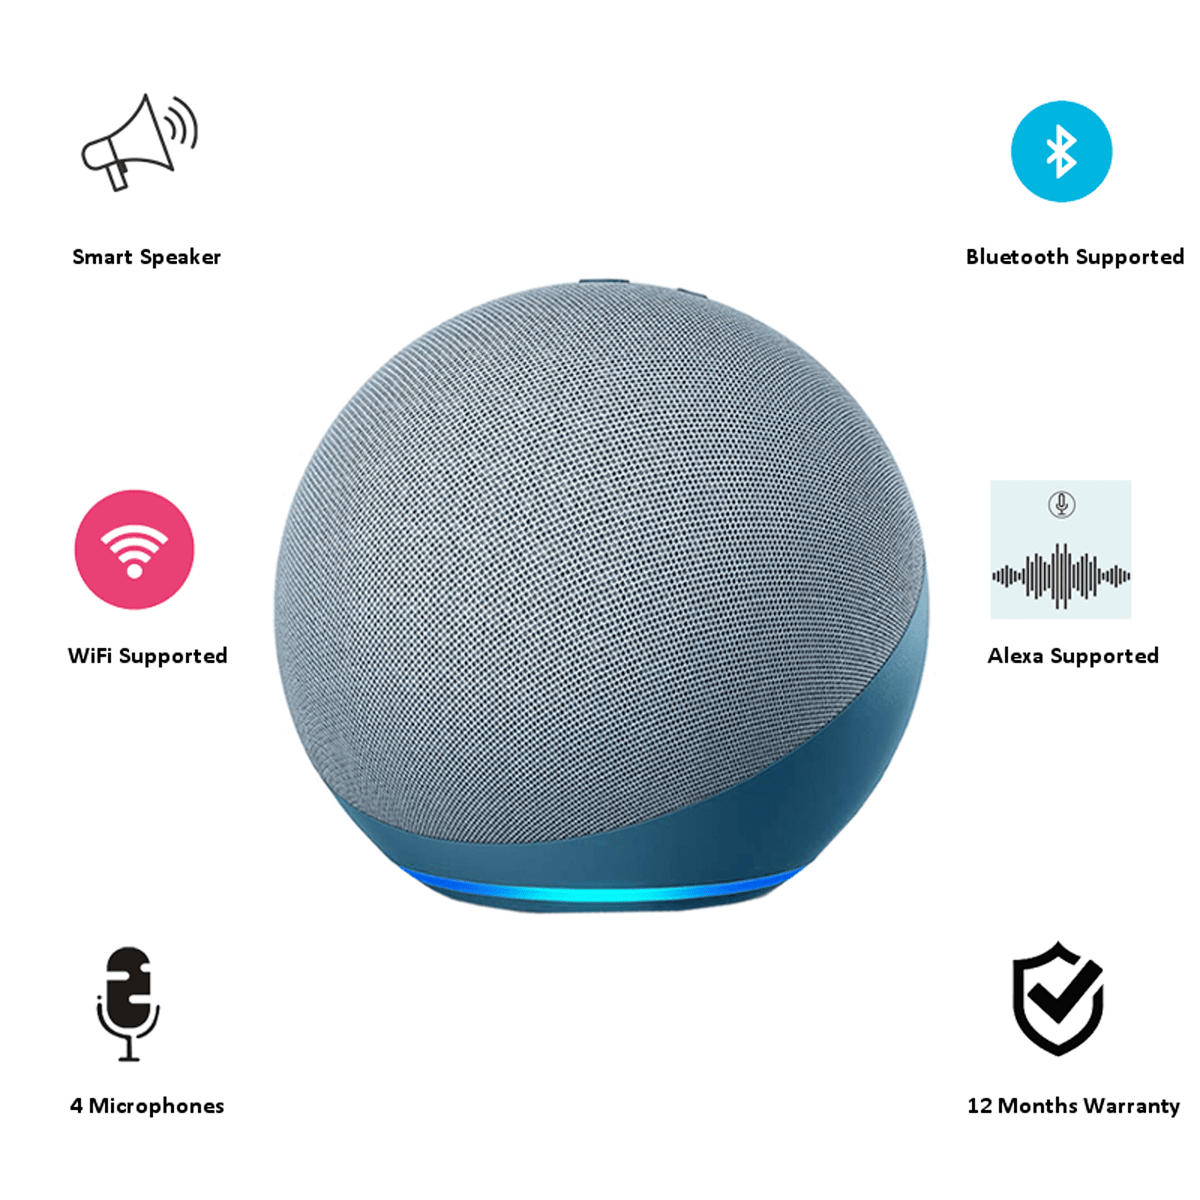 Echo Dot (4th Gen) Online at Lowest Price in India